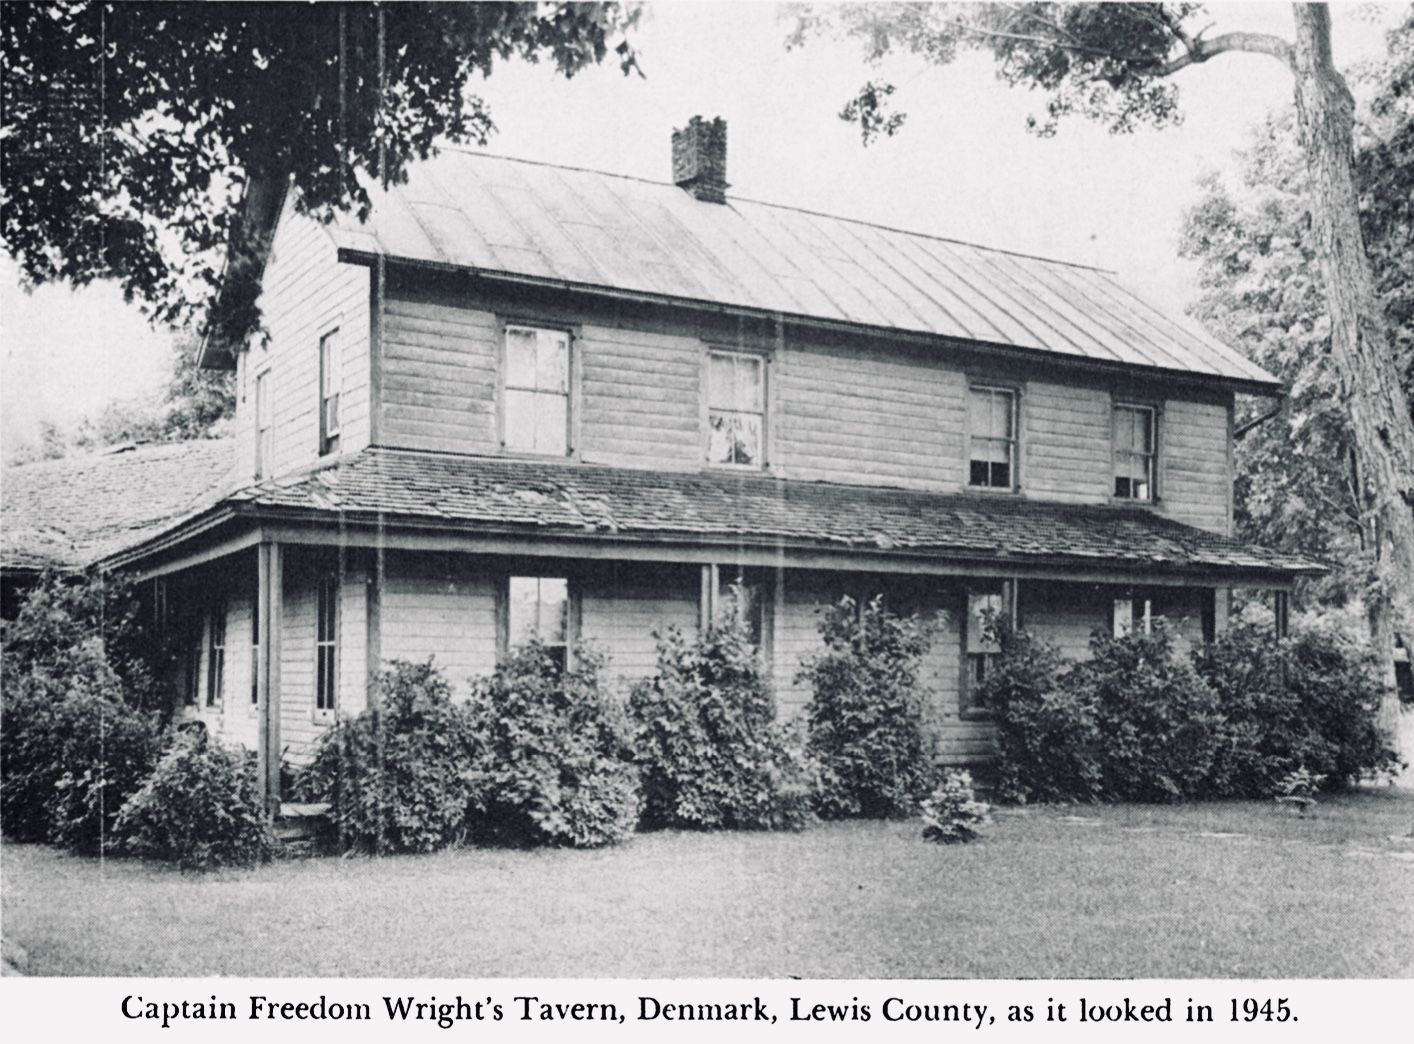 Captain Freedom Wright's Tavern, Denmark, Lewis County, as it looked in 1945